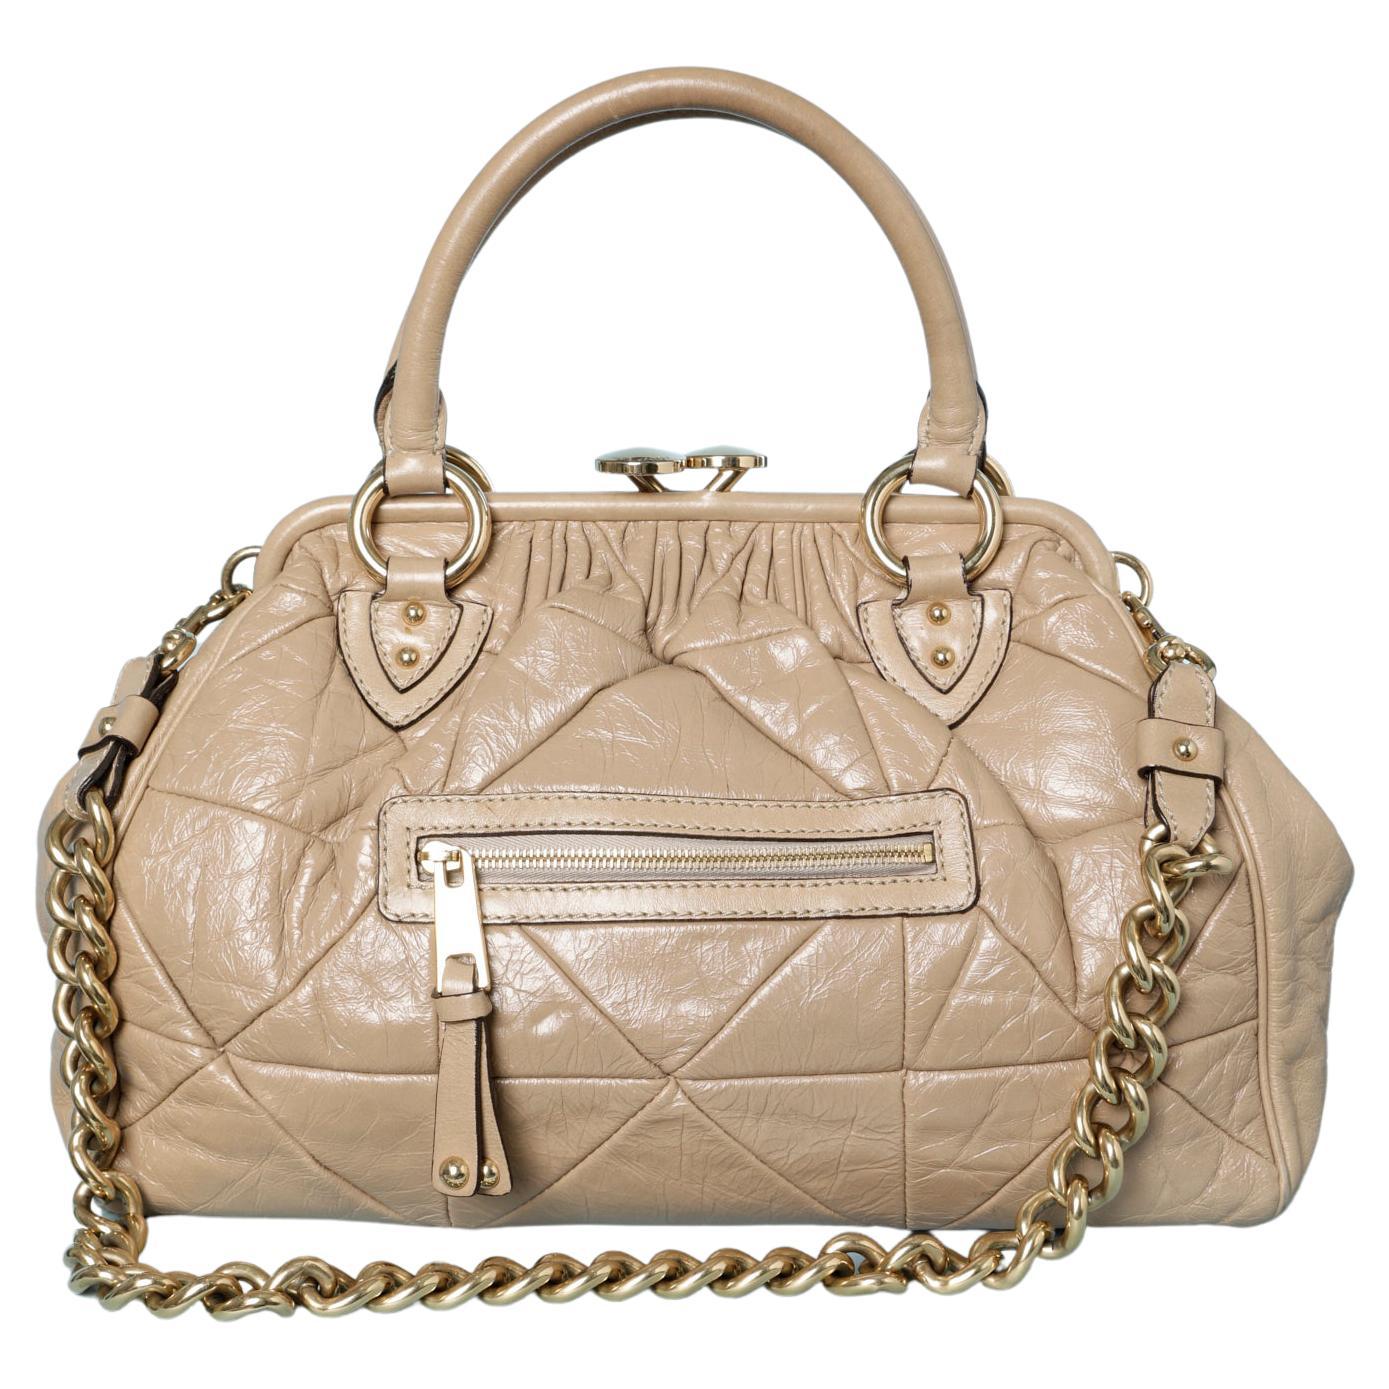 How can I tell if a Marc Jacobs bag is real? - Questions & Answers